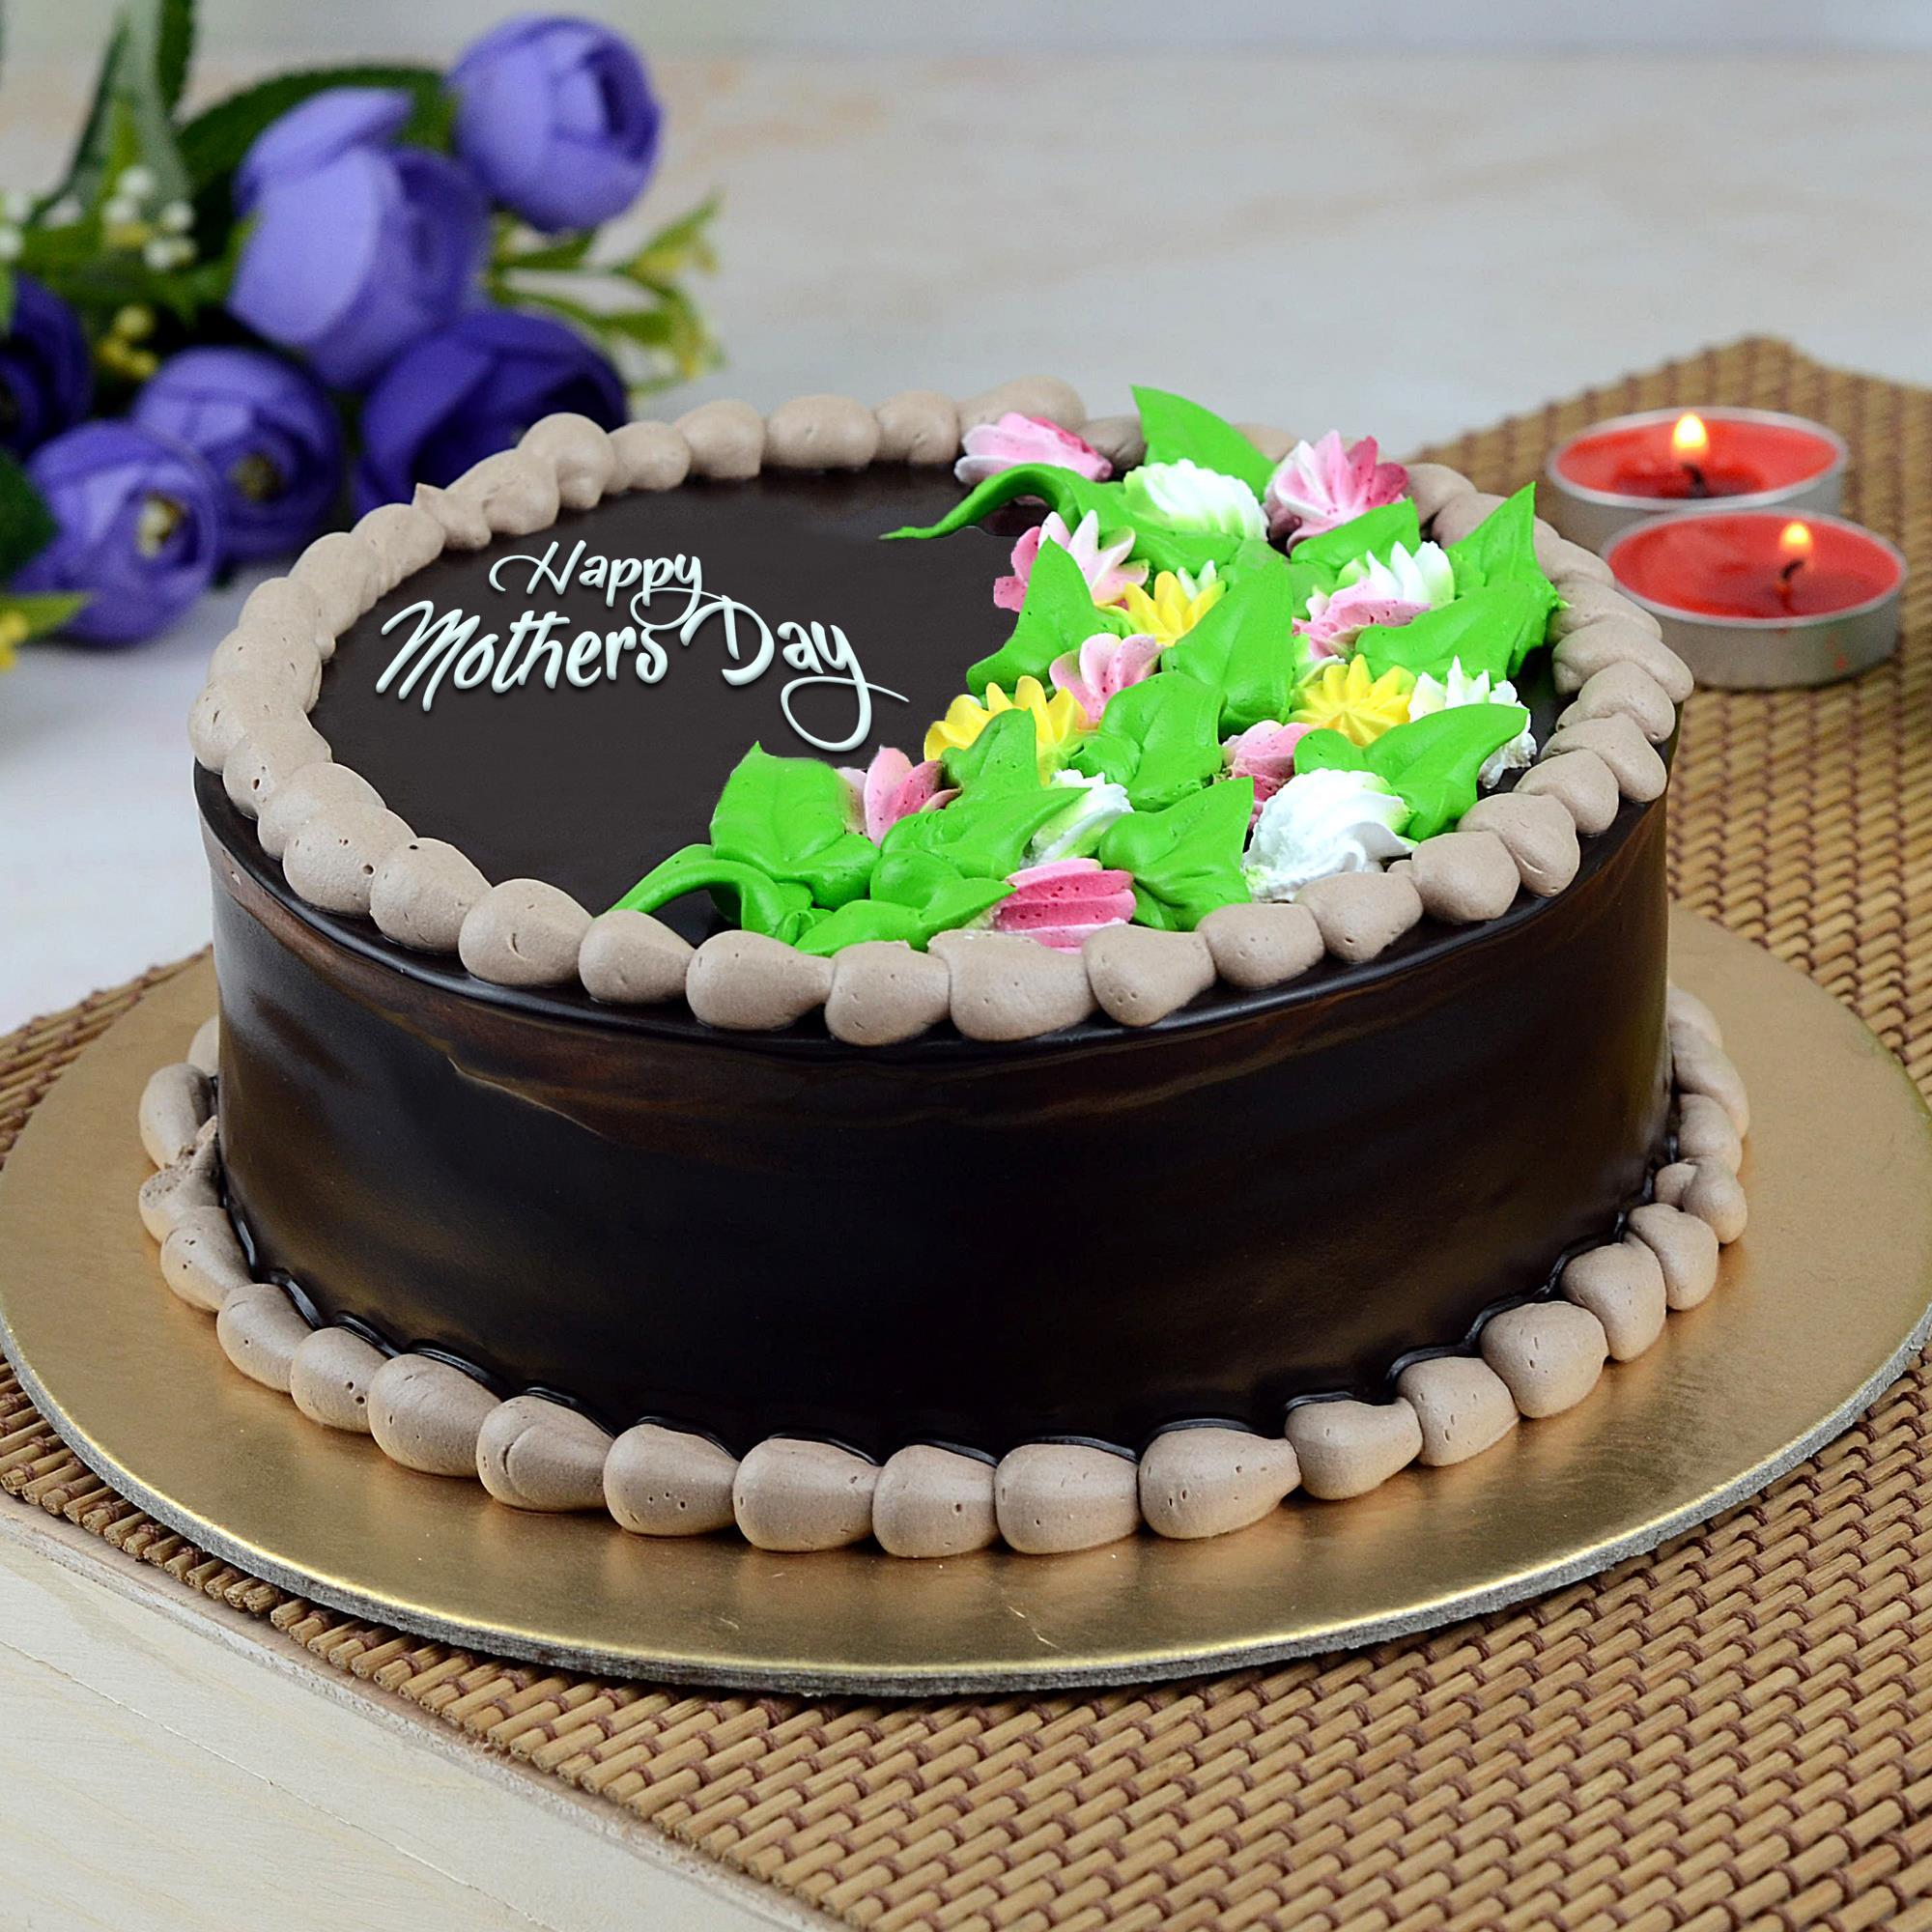 Happy Mothers Day Cake This Would Stock Photo 1138551461 | Shutterstock